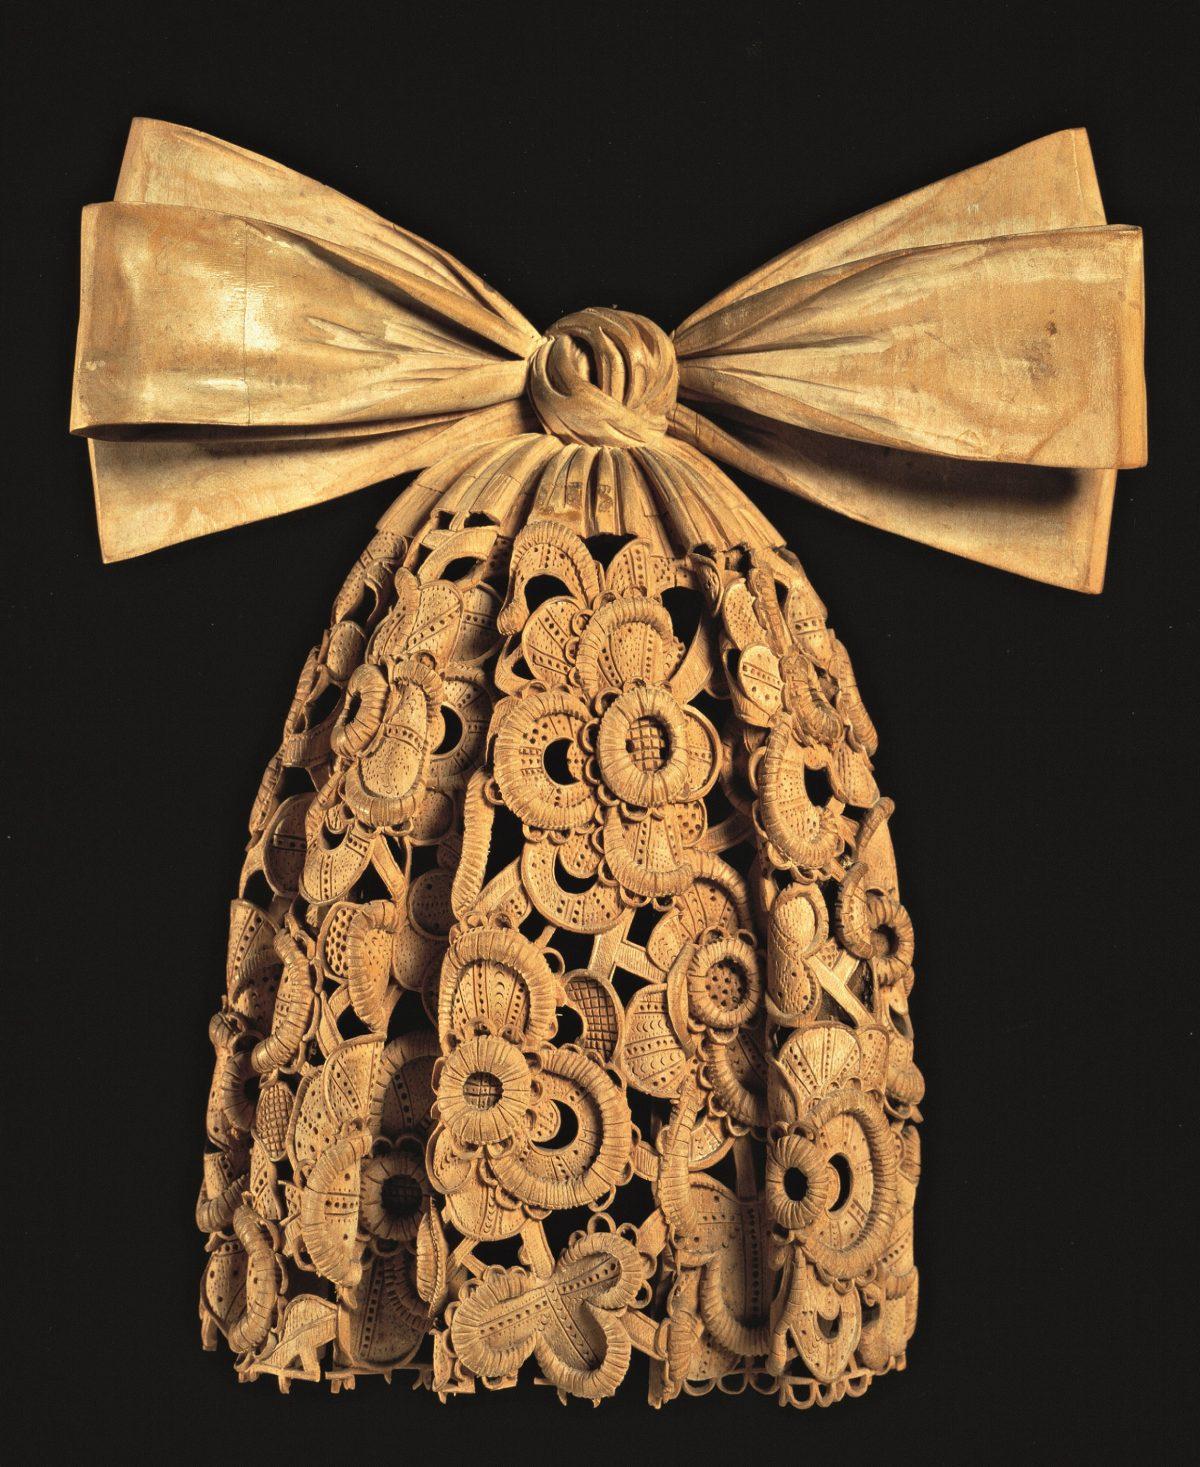 Carving of a cravat, circa 1690, by Grinling Gibbons (1648-1721). Limewood, with raised and openwork carving. (V&A images/Victoria and Albert Museum, London)